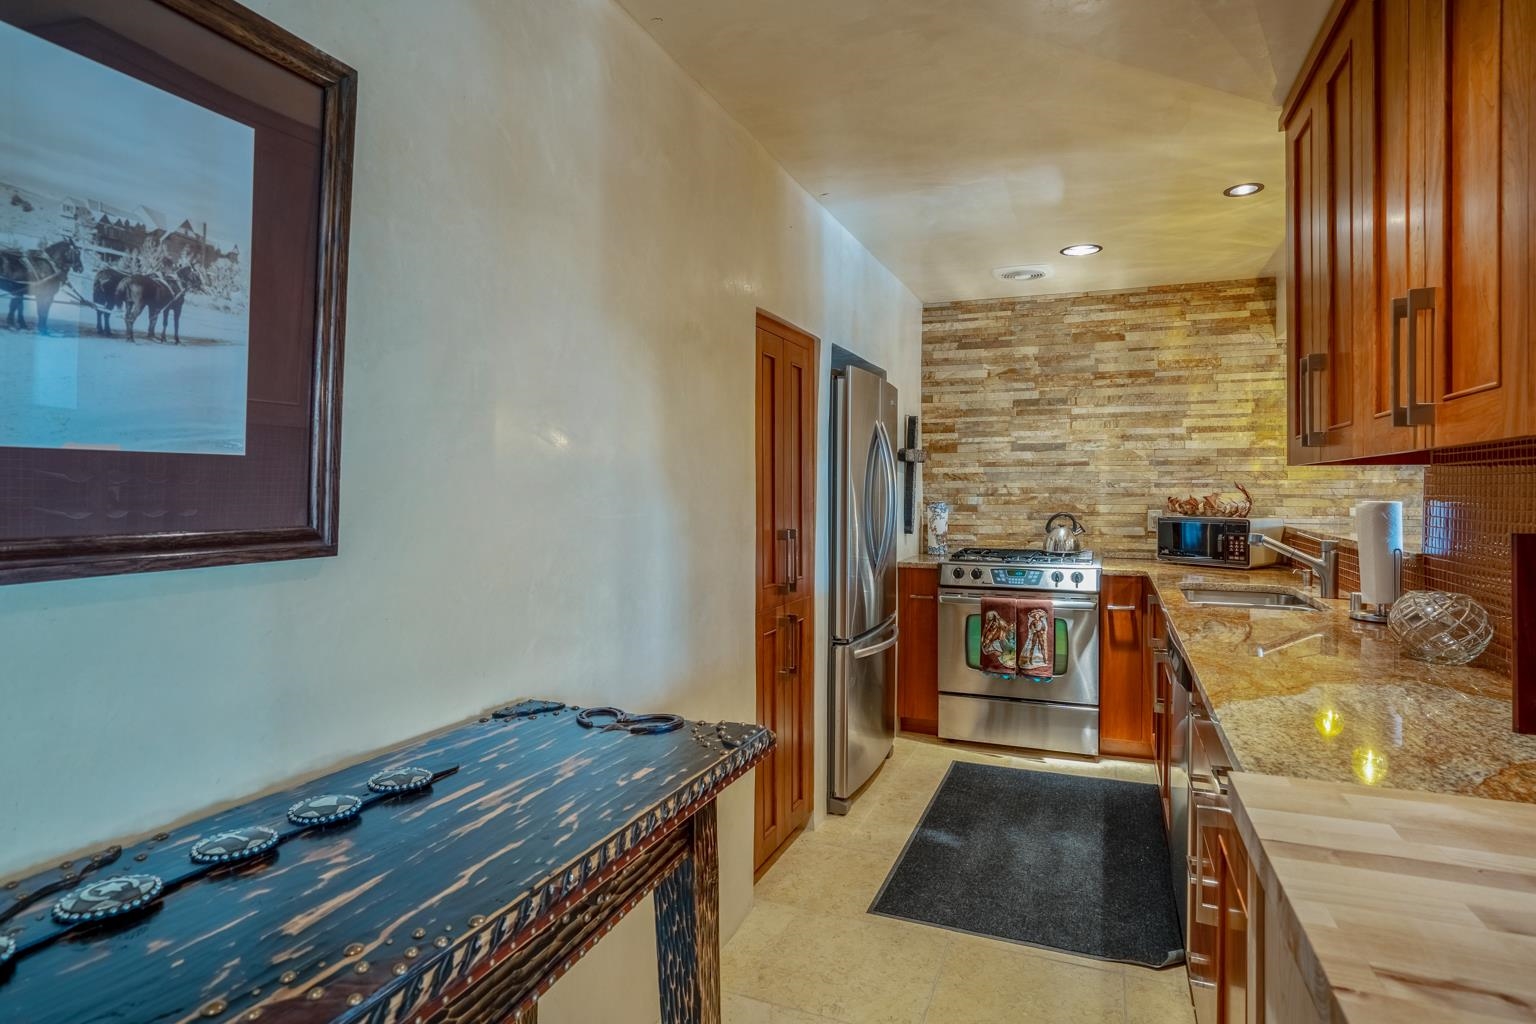 1031 Governor Dempsey E, Santa Fe, New Mexico 87501, 4 Bedrooms Bedrooms, ,4 BathroomsBathrooms,Residential,For Sale,1031 Governor Dempsey E,202104767